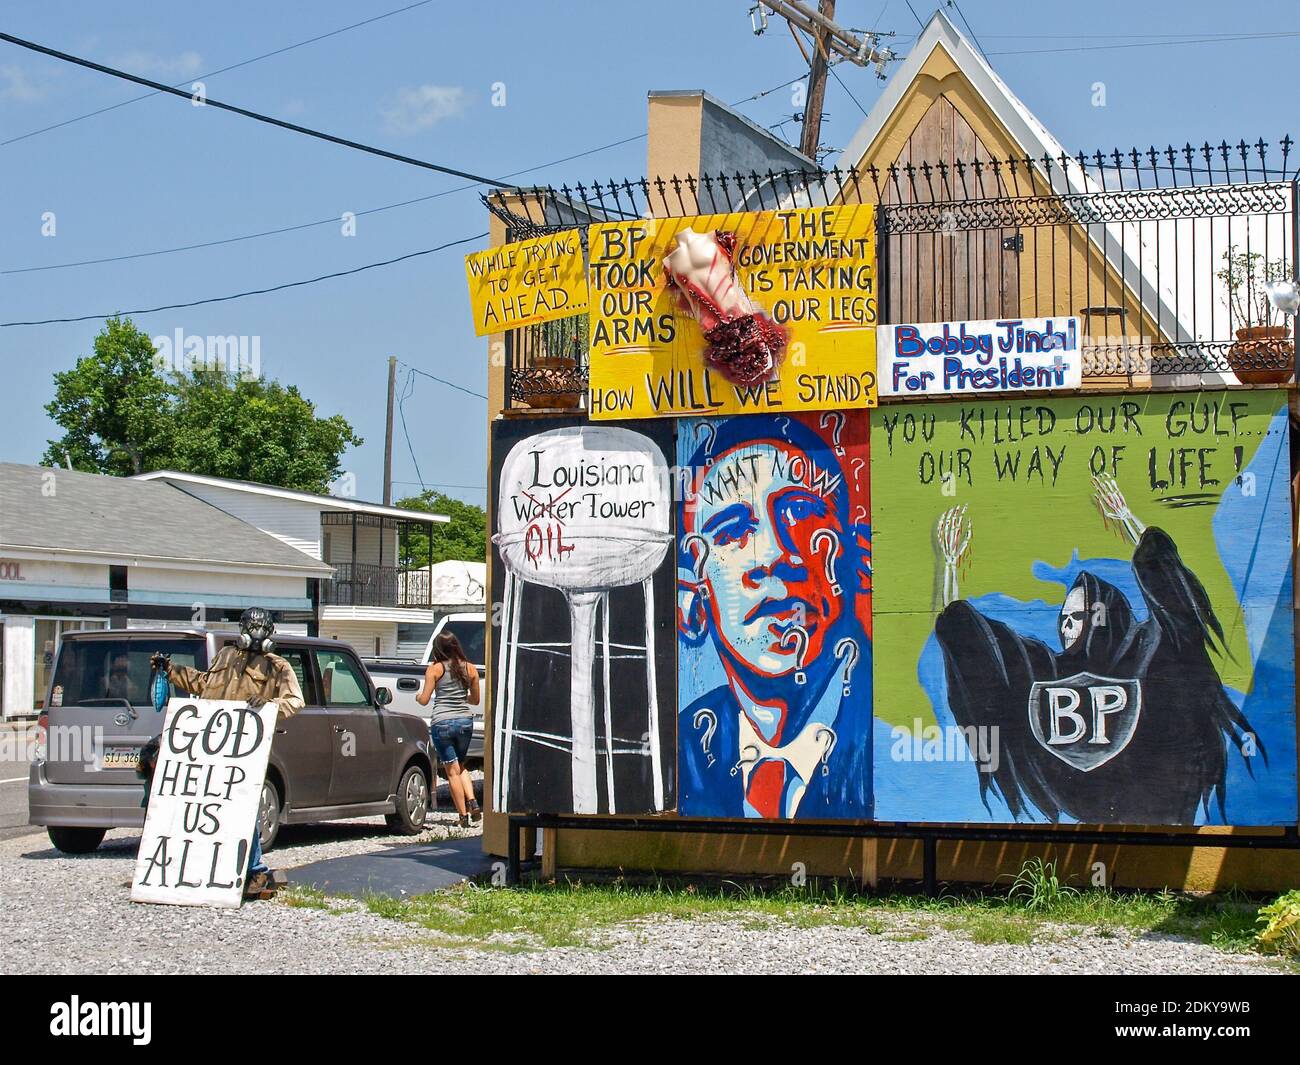 Lafourche Parish, LA - JULY 29, 2010: Corner Grocery Store in Lafourche Parish with signs protesting the BP oil spill and government response Stock Photo